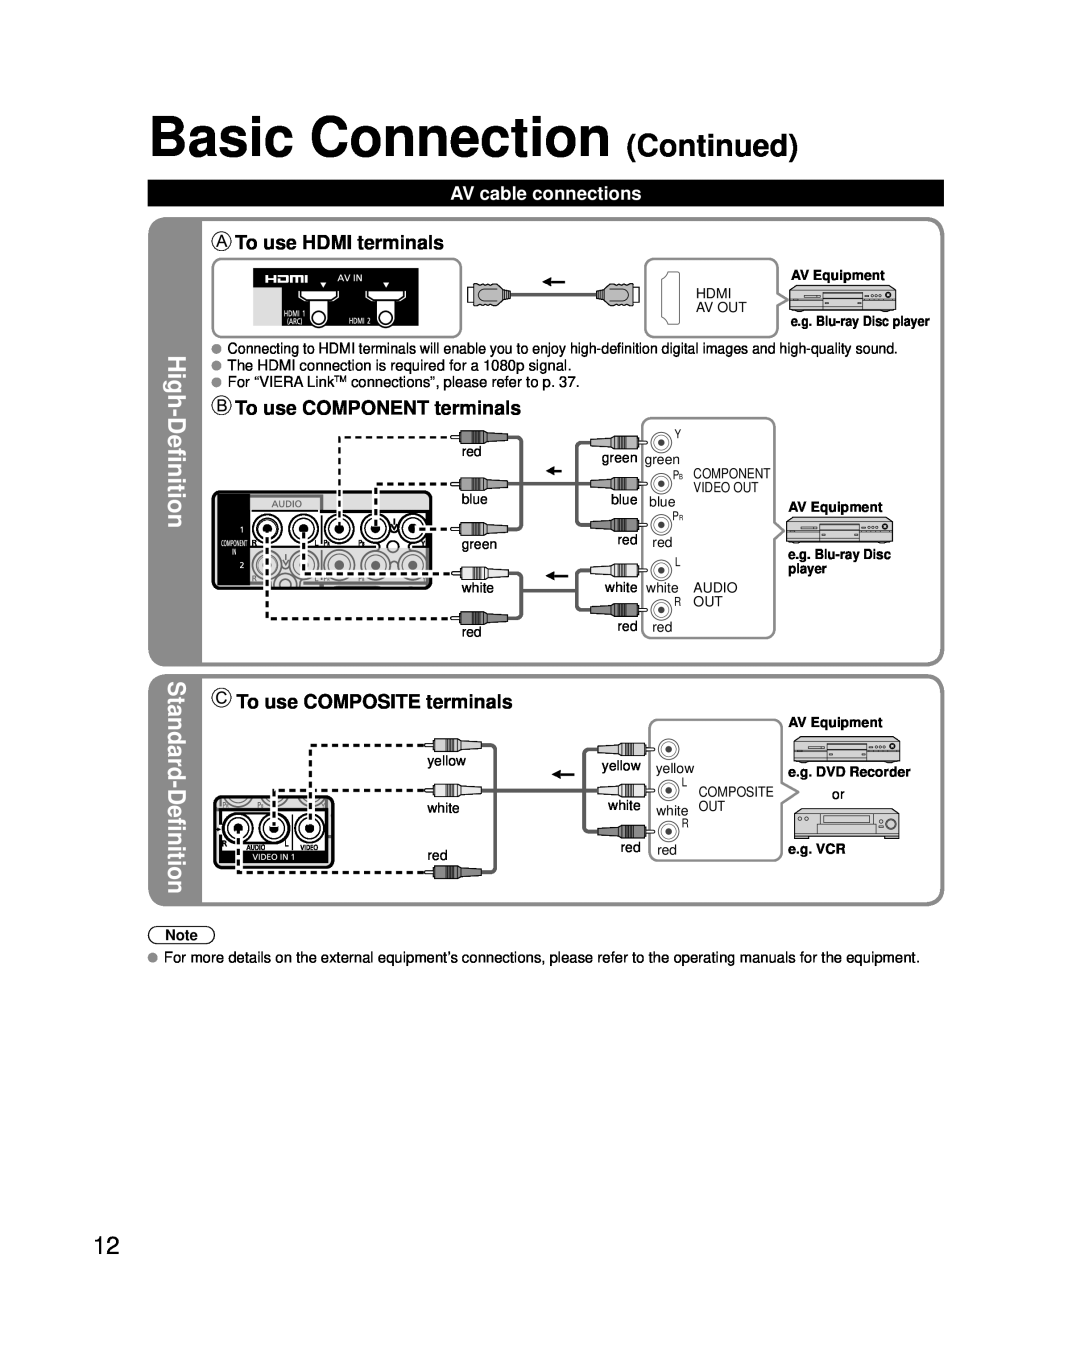 Panasonic TC-P42G25, TC-P46G25 Basic Connection Continued, High-Definition, Standard-Definition, To use HDMI terminals 